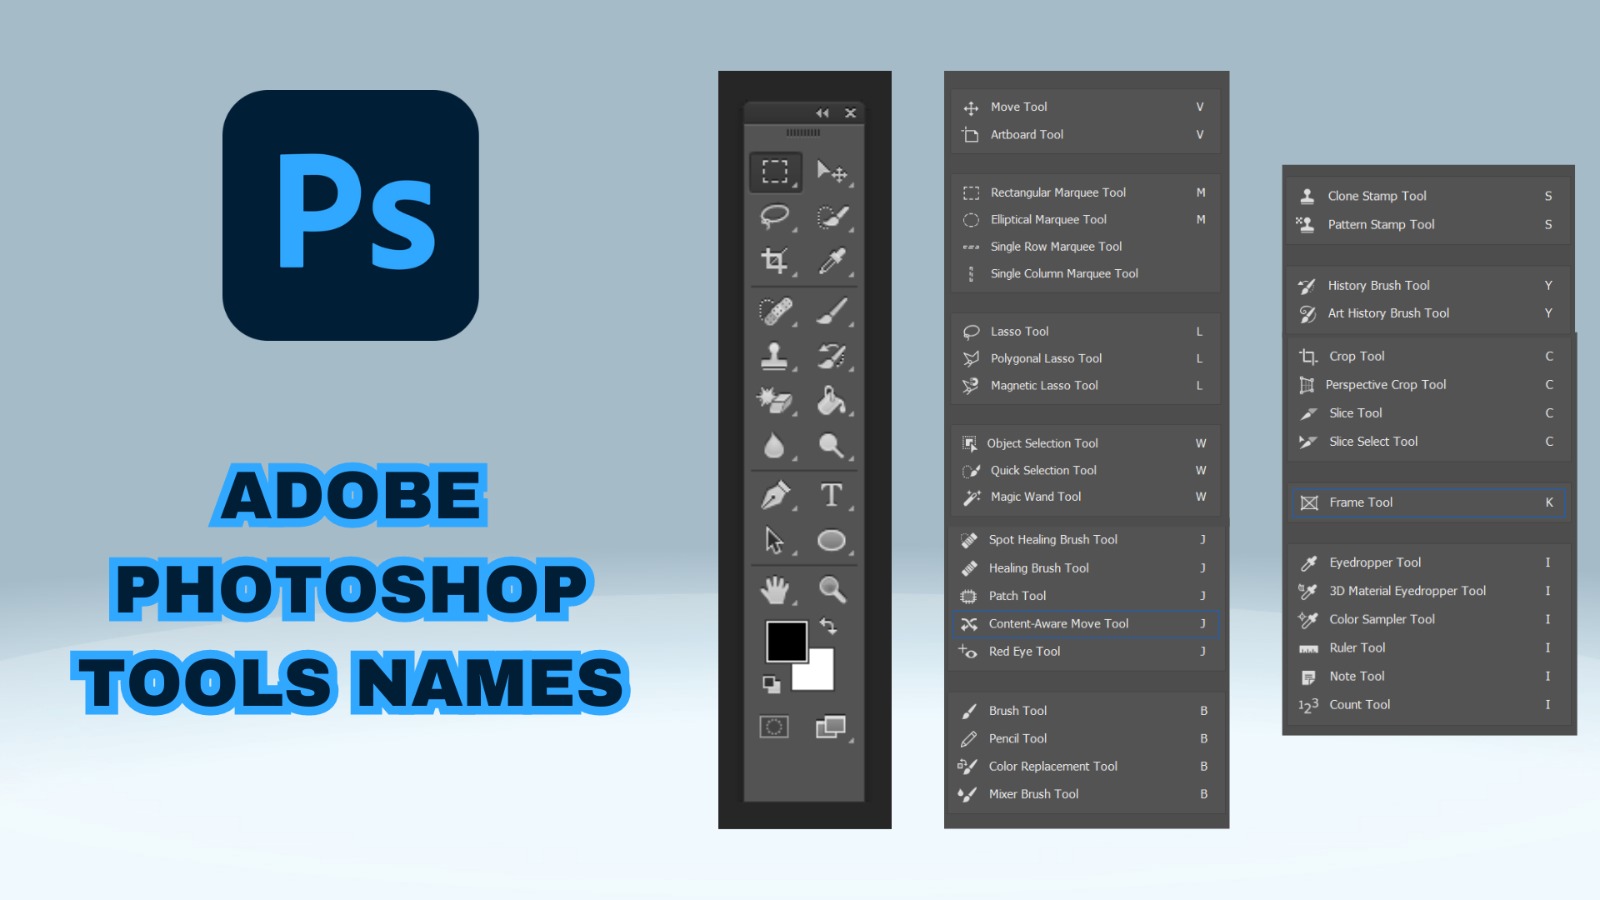 Adobe Photoshop Tools Name & there Uses